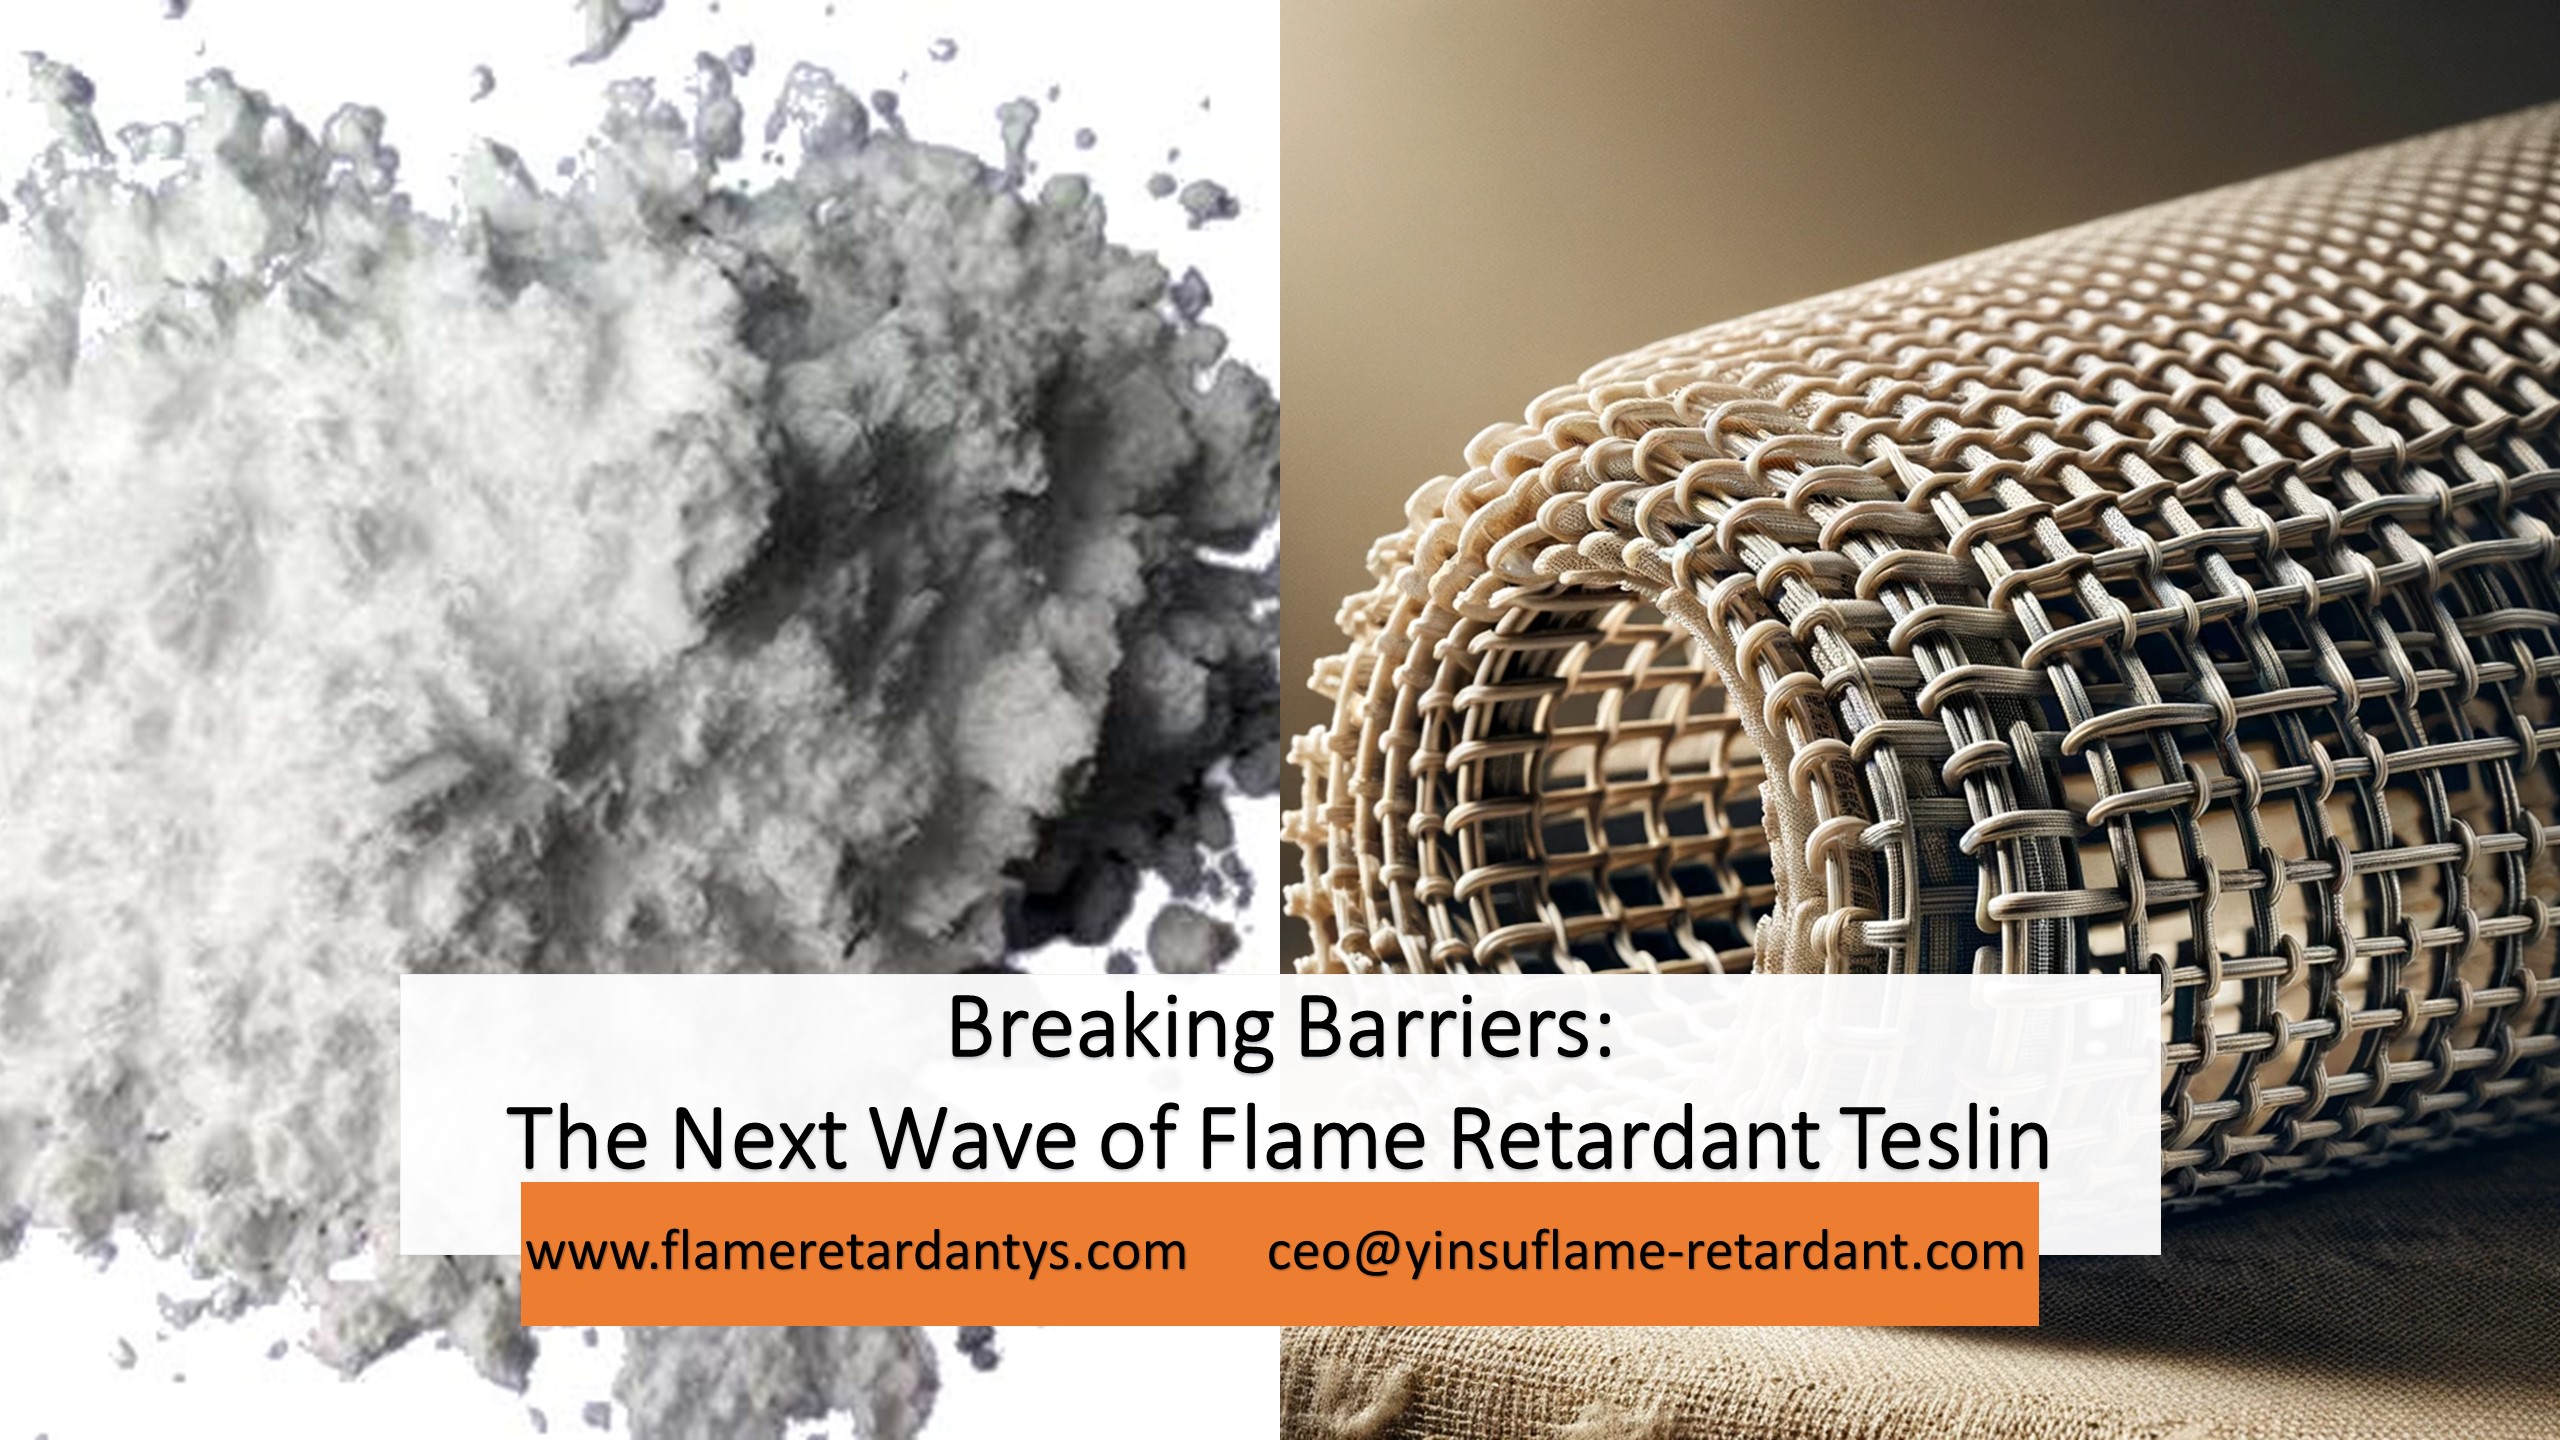 Breaking Barriers The Next Wave of Flame Retardant Teslin